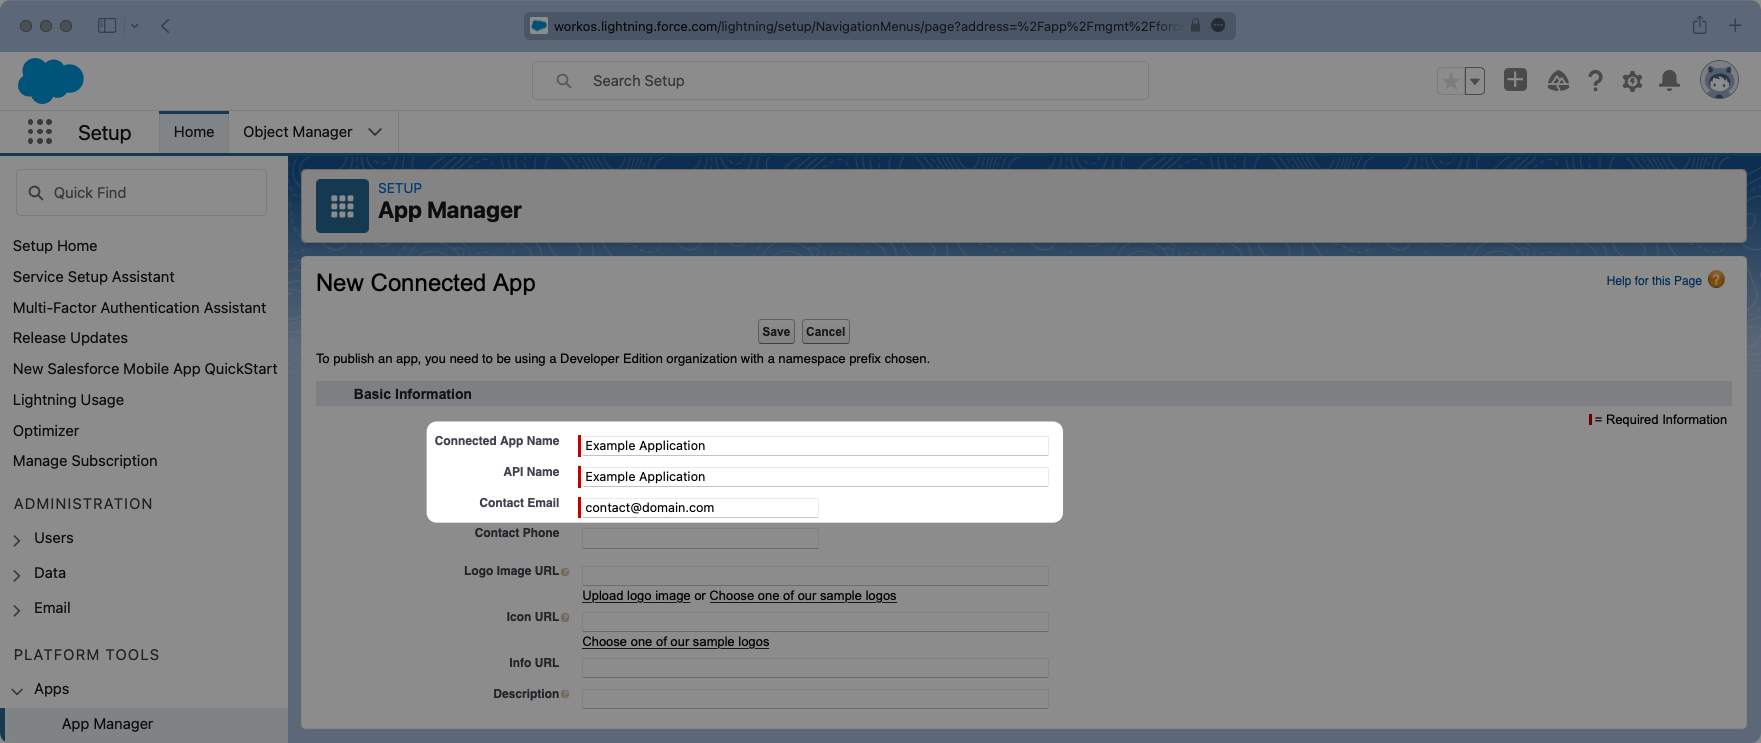 A screenshot showing how to conifgure the name and contact email for the new Connected App in the Salesforce dashboard.